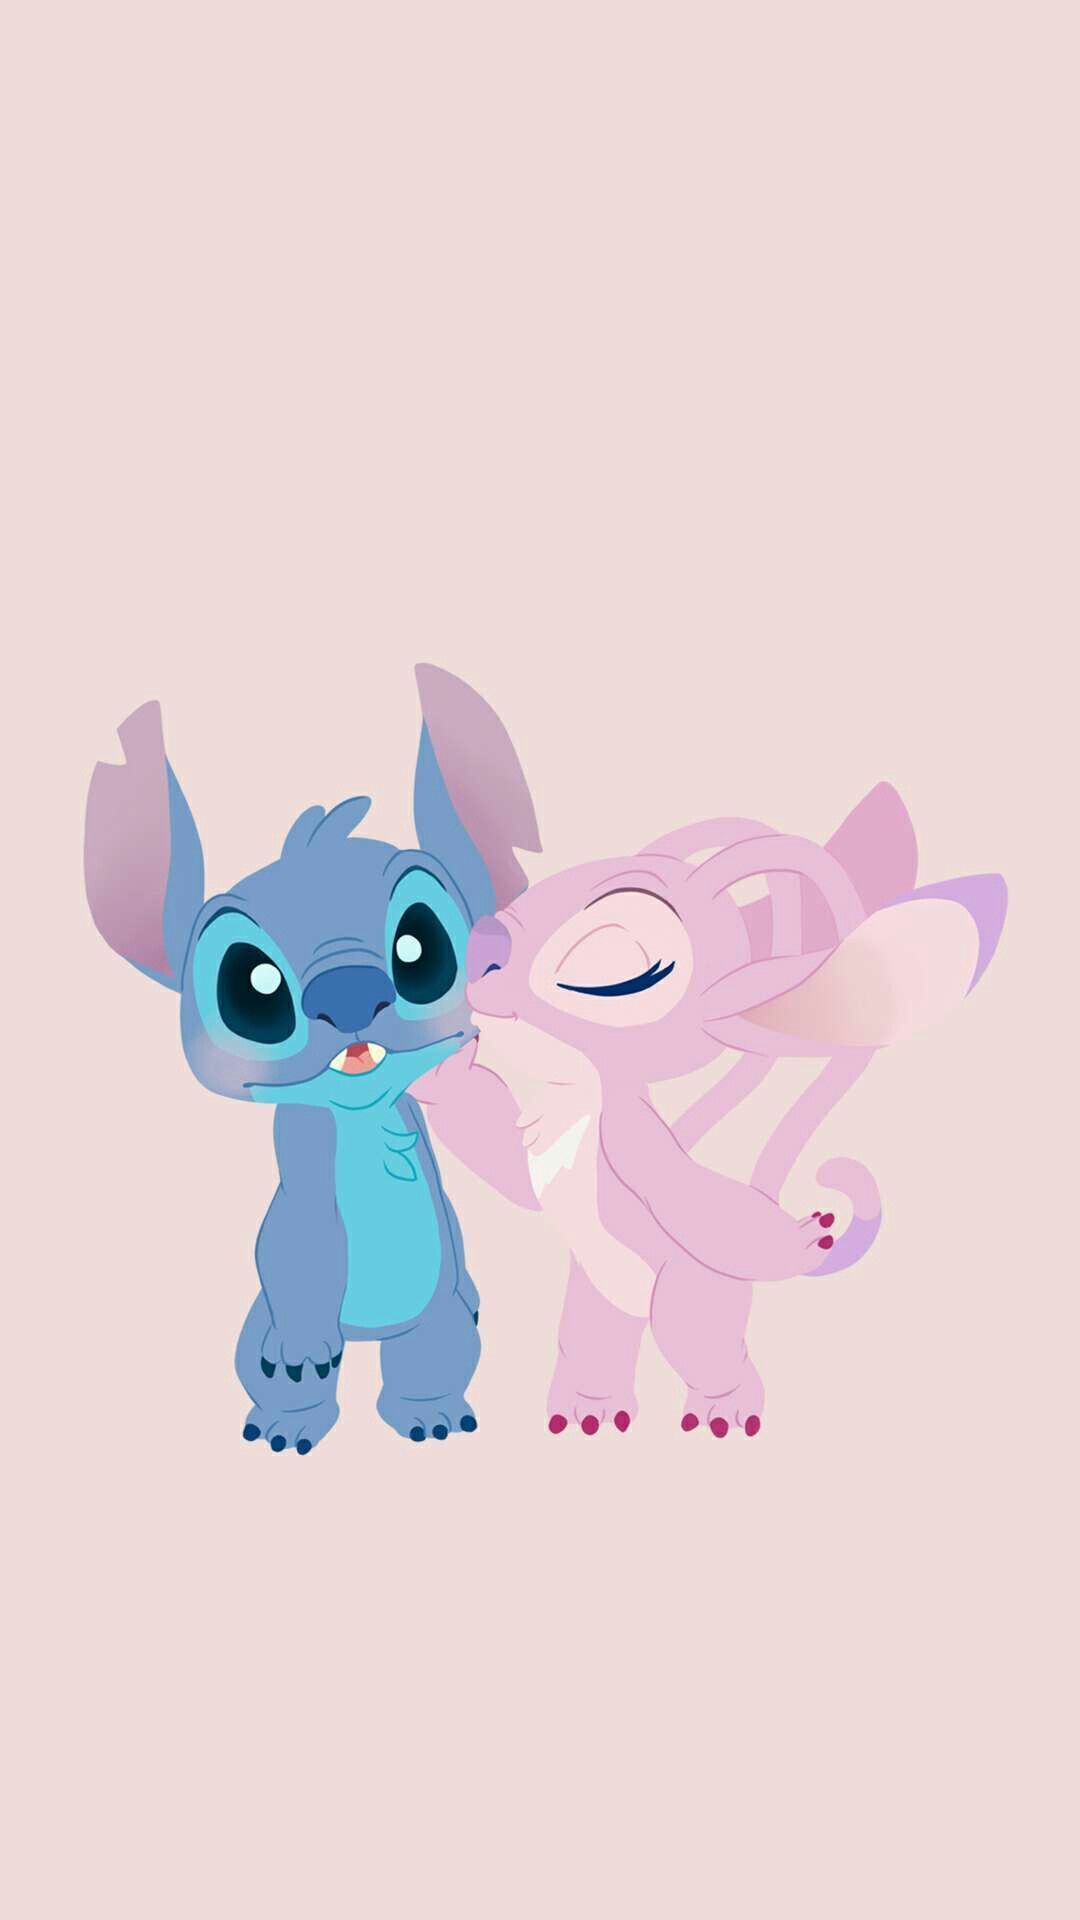 Lilo And Stitch Aesthetic Wallpapers Wallpaper Cave Disney stitch disney universe disney walt disney lilo and stitch lilo stitch a collection of the top 47 cute aesthetic wallpapers and backgrounds available for download for free. lilo and stitch aesthetic wallpapers